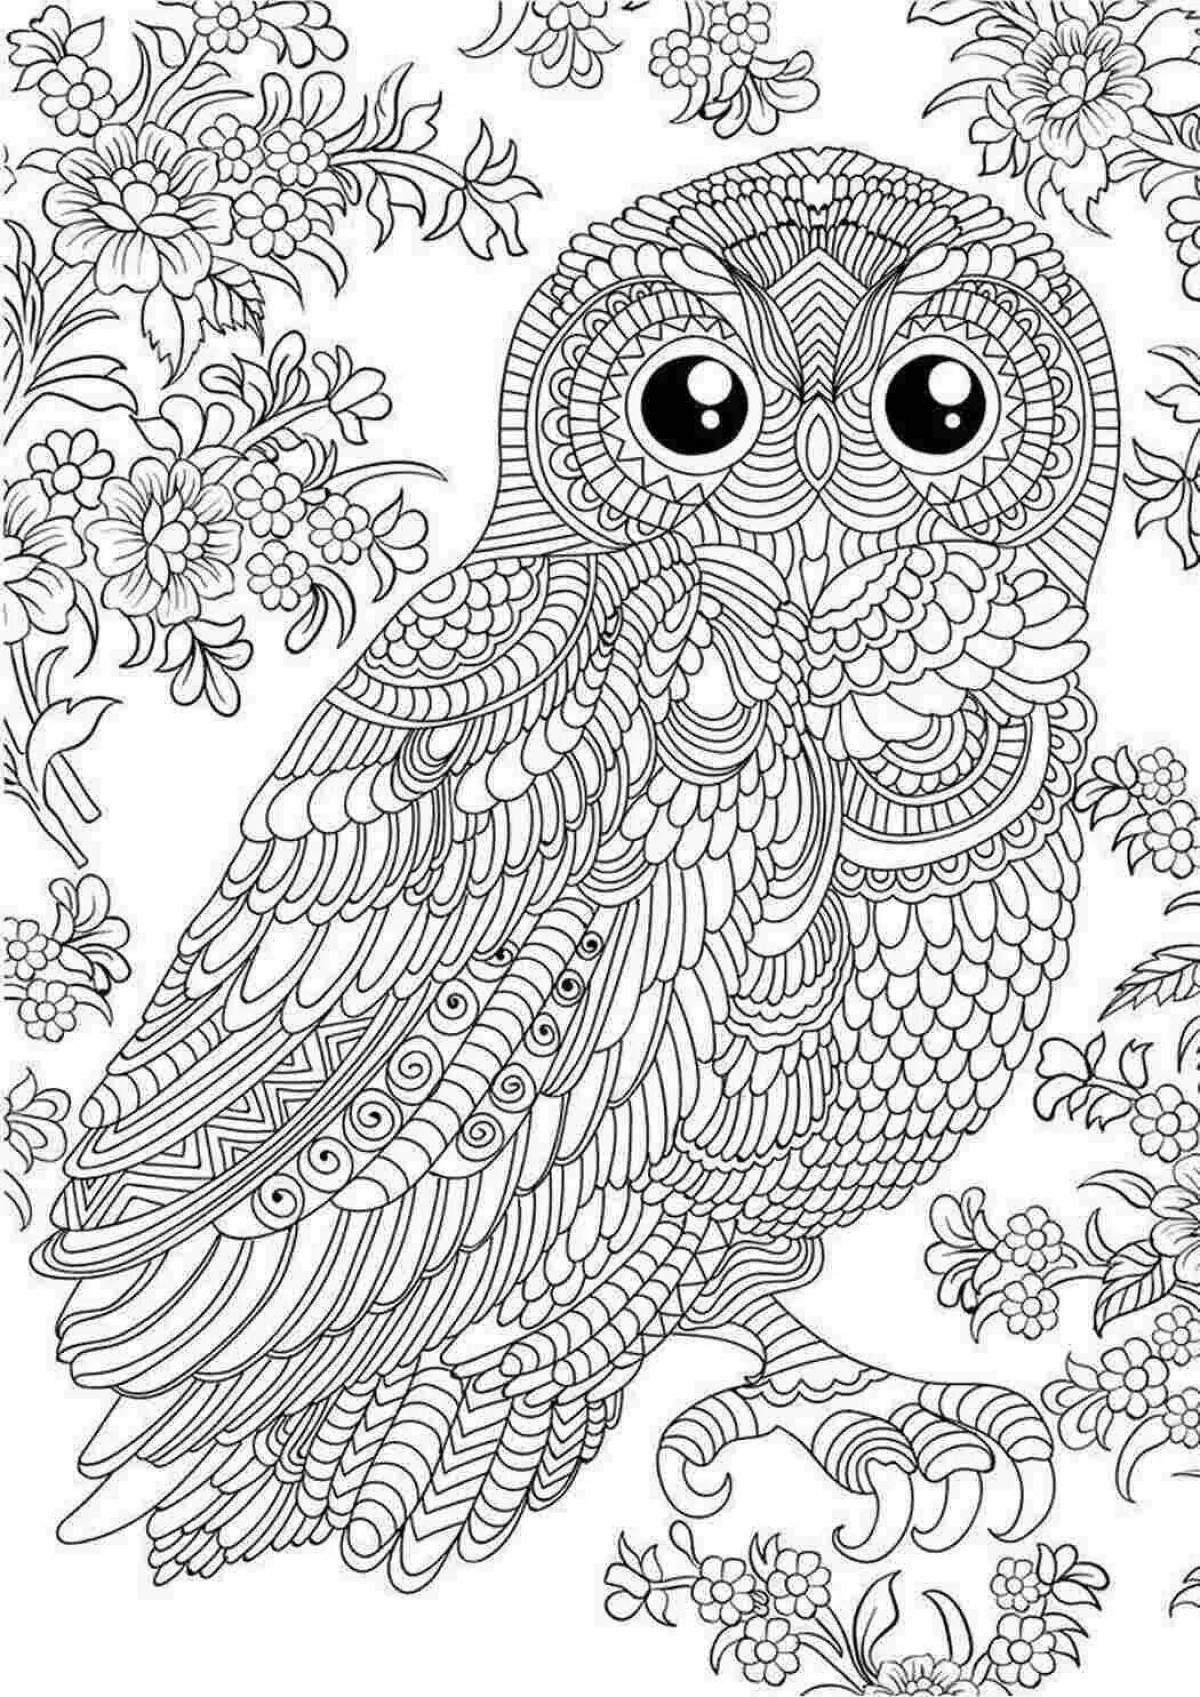 Intriguing coloring book for girls 12 years old animal complex